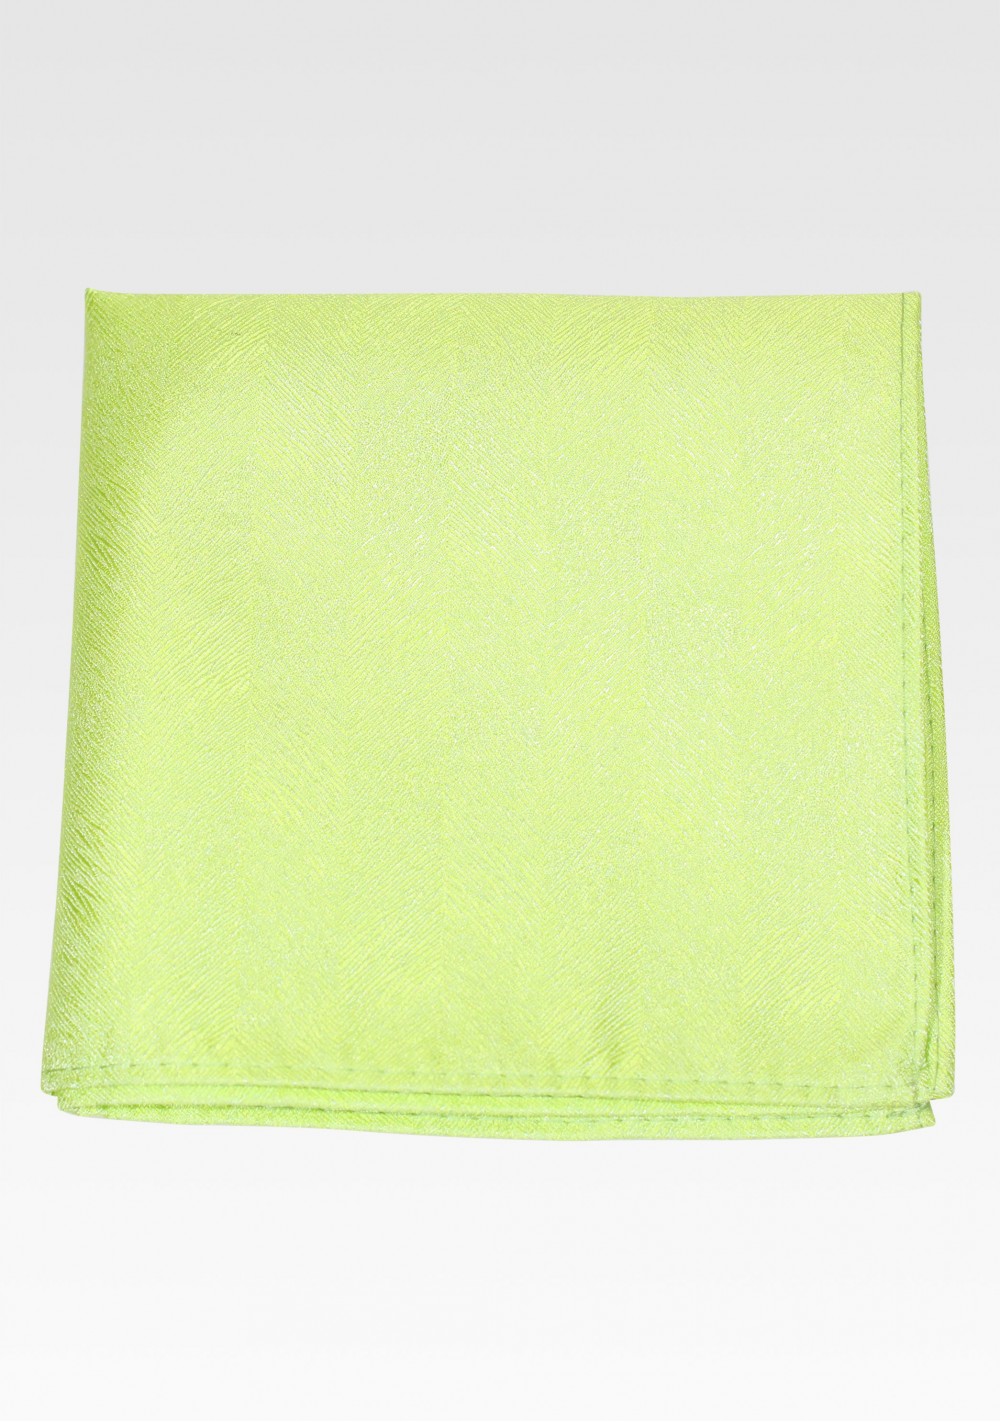 Woodgrain Textured Pocket Square in Bright Lime